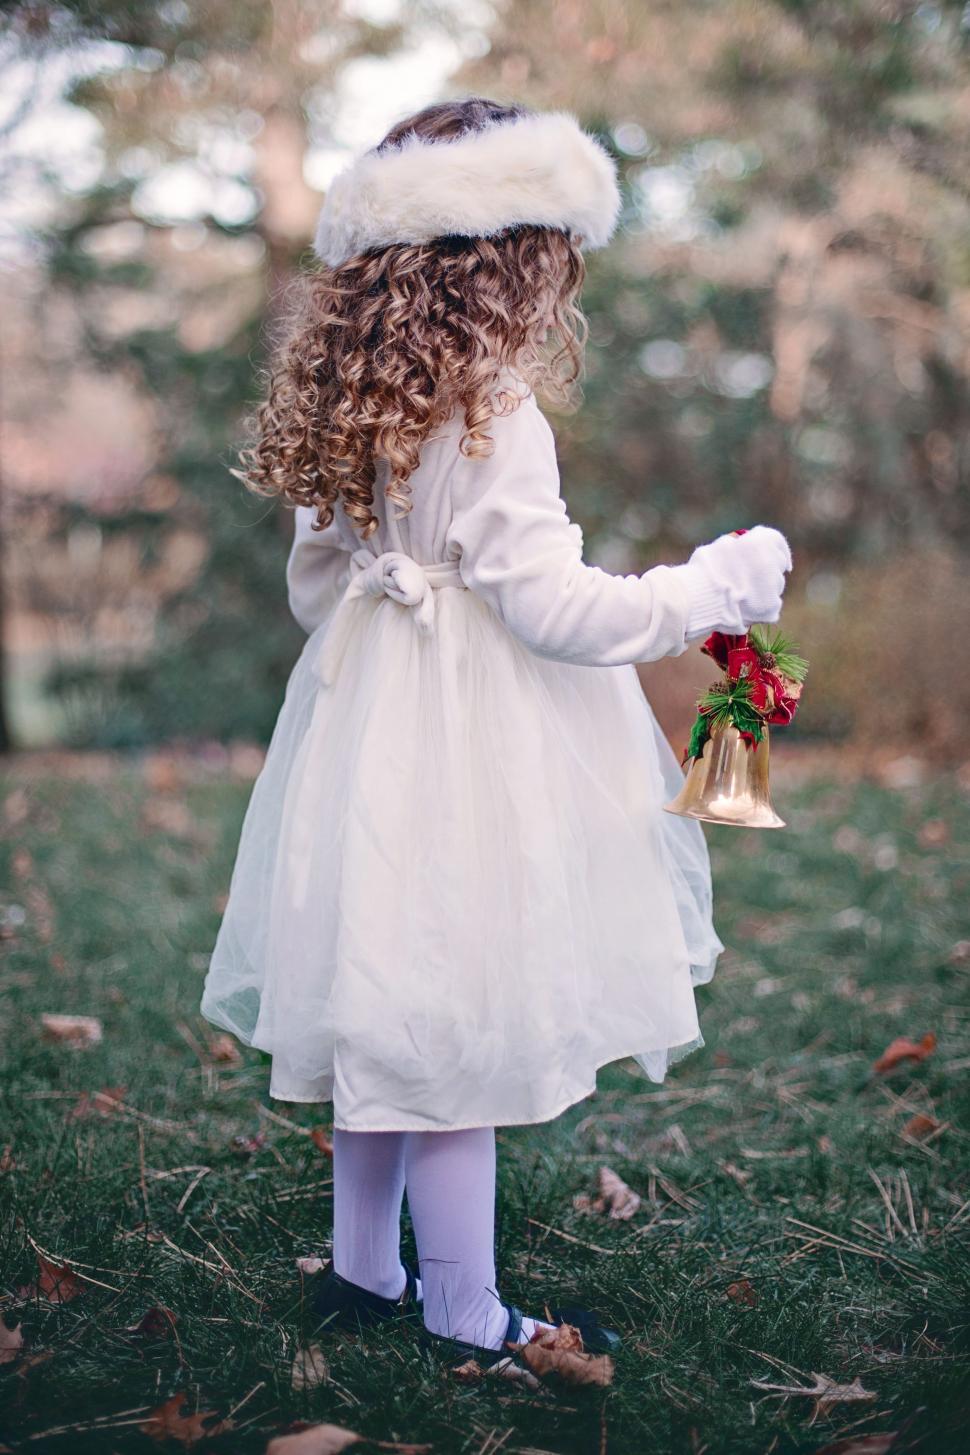 Free Image of Little Girl Standing With Christmas Bell 